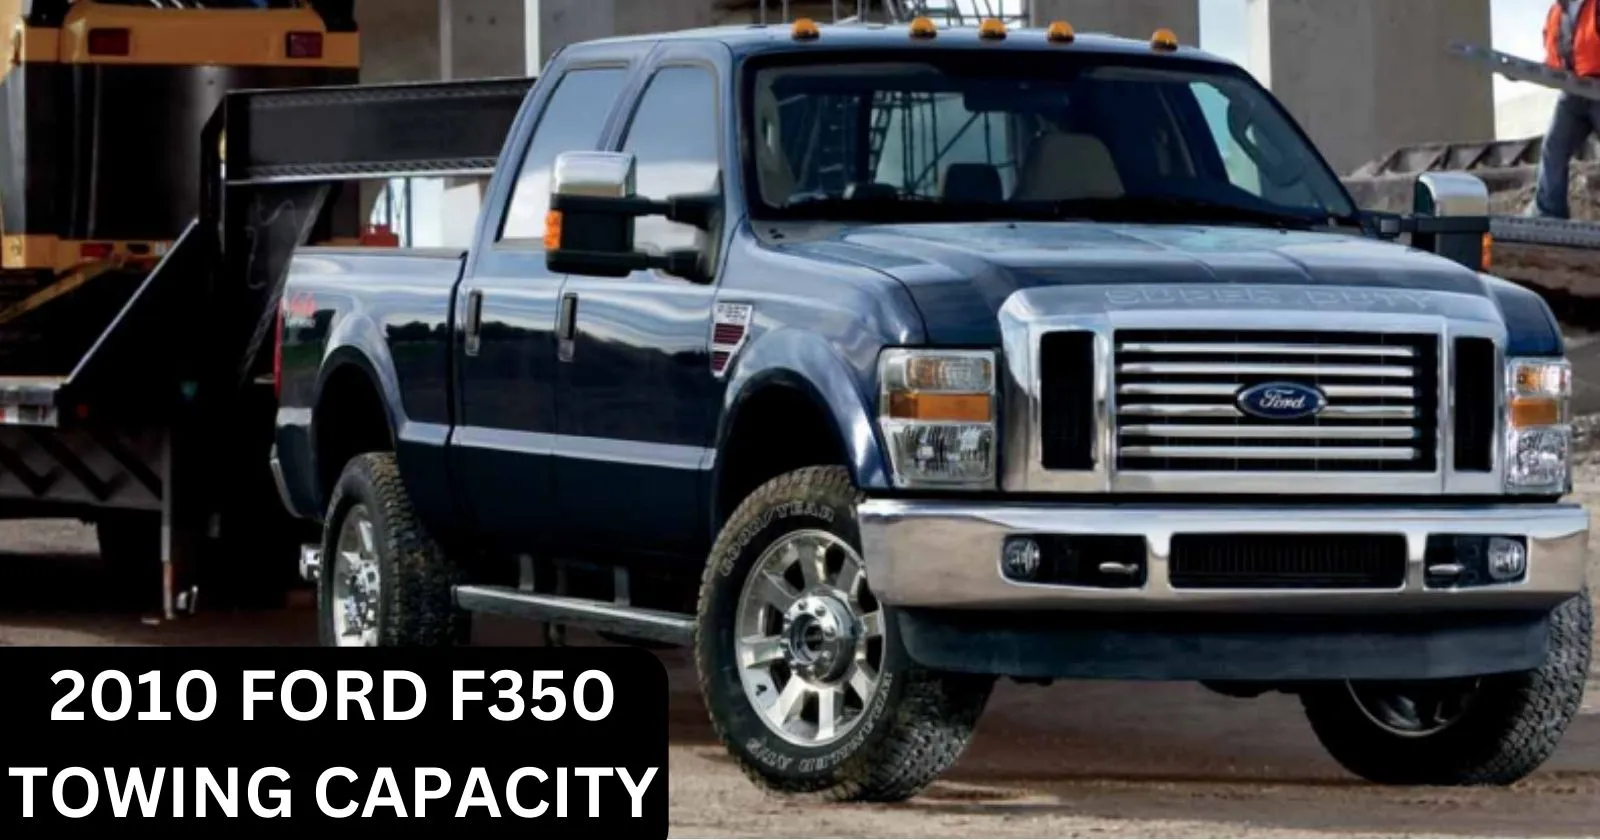 explore-2010-ford-f350-towing-capacity-with-chart-thecartowing